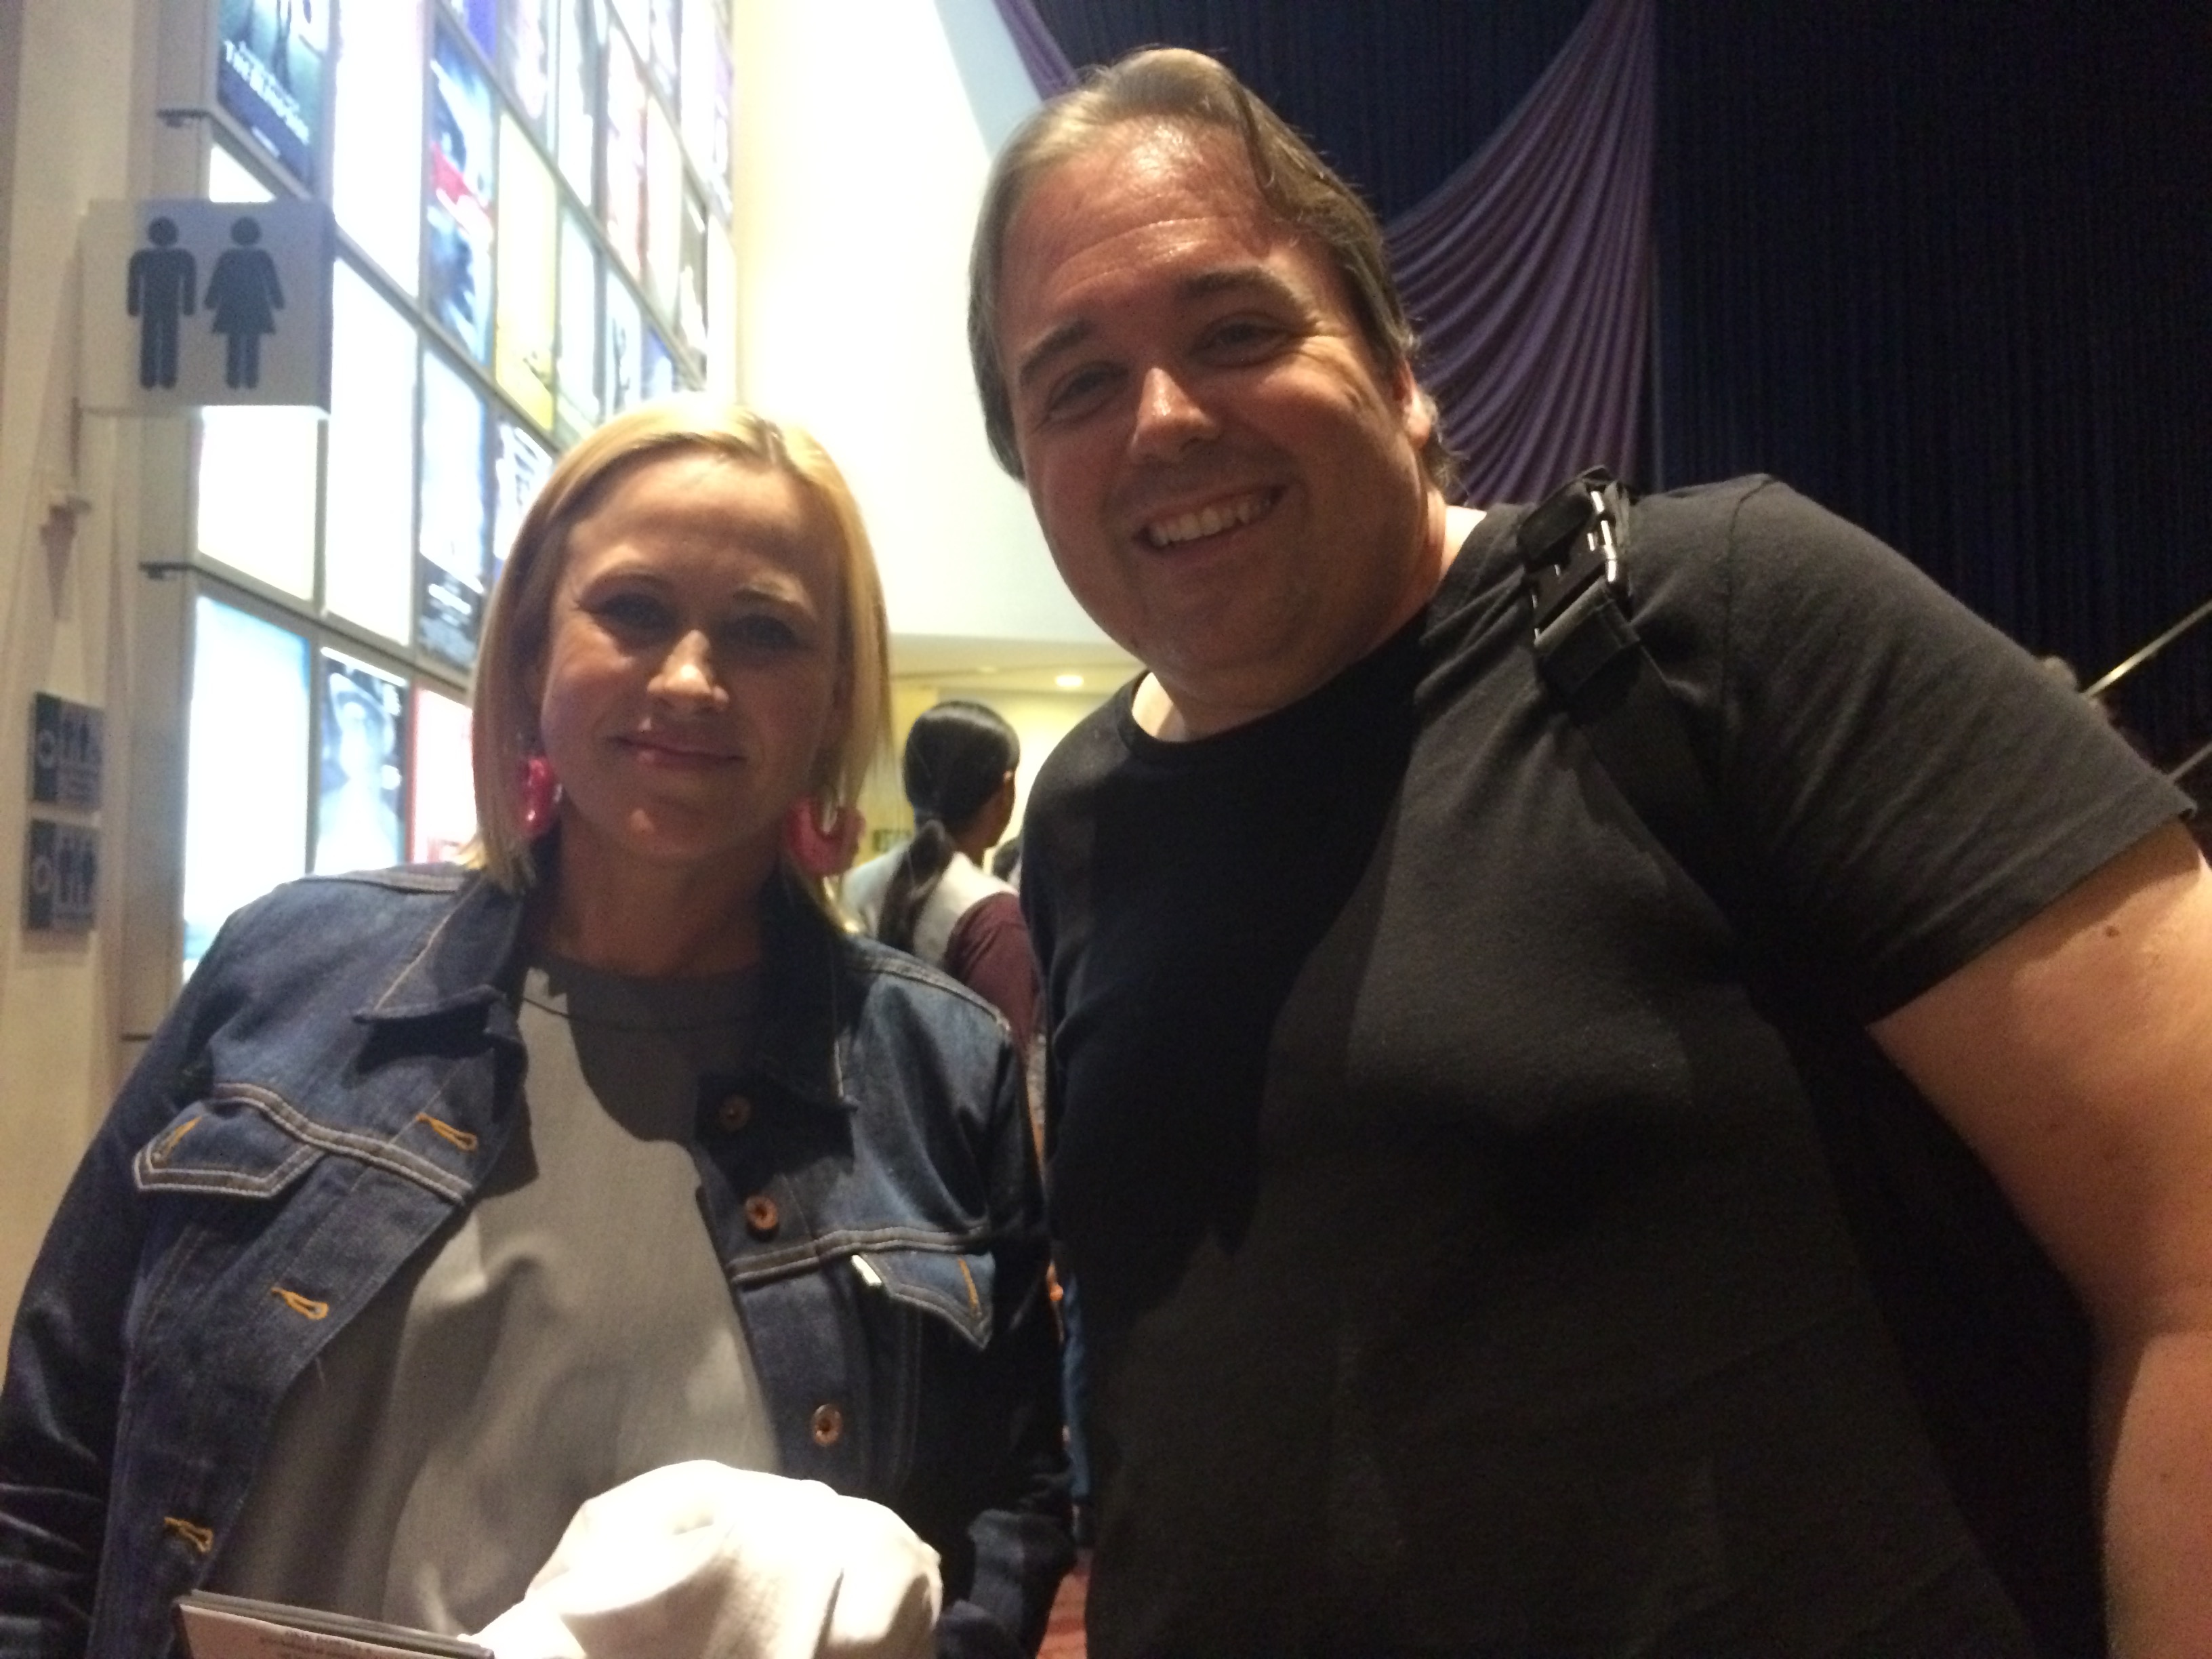 With Academy Award-winner Patricia Arquette, at a screening of BOYHOOD.